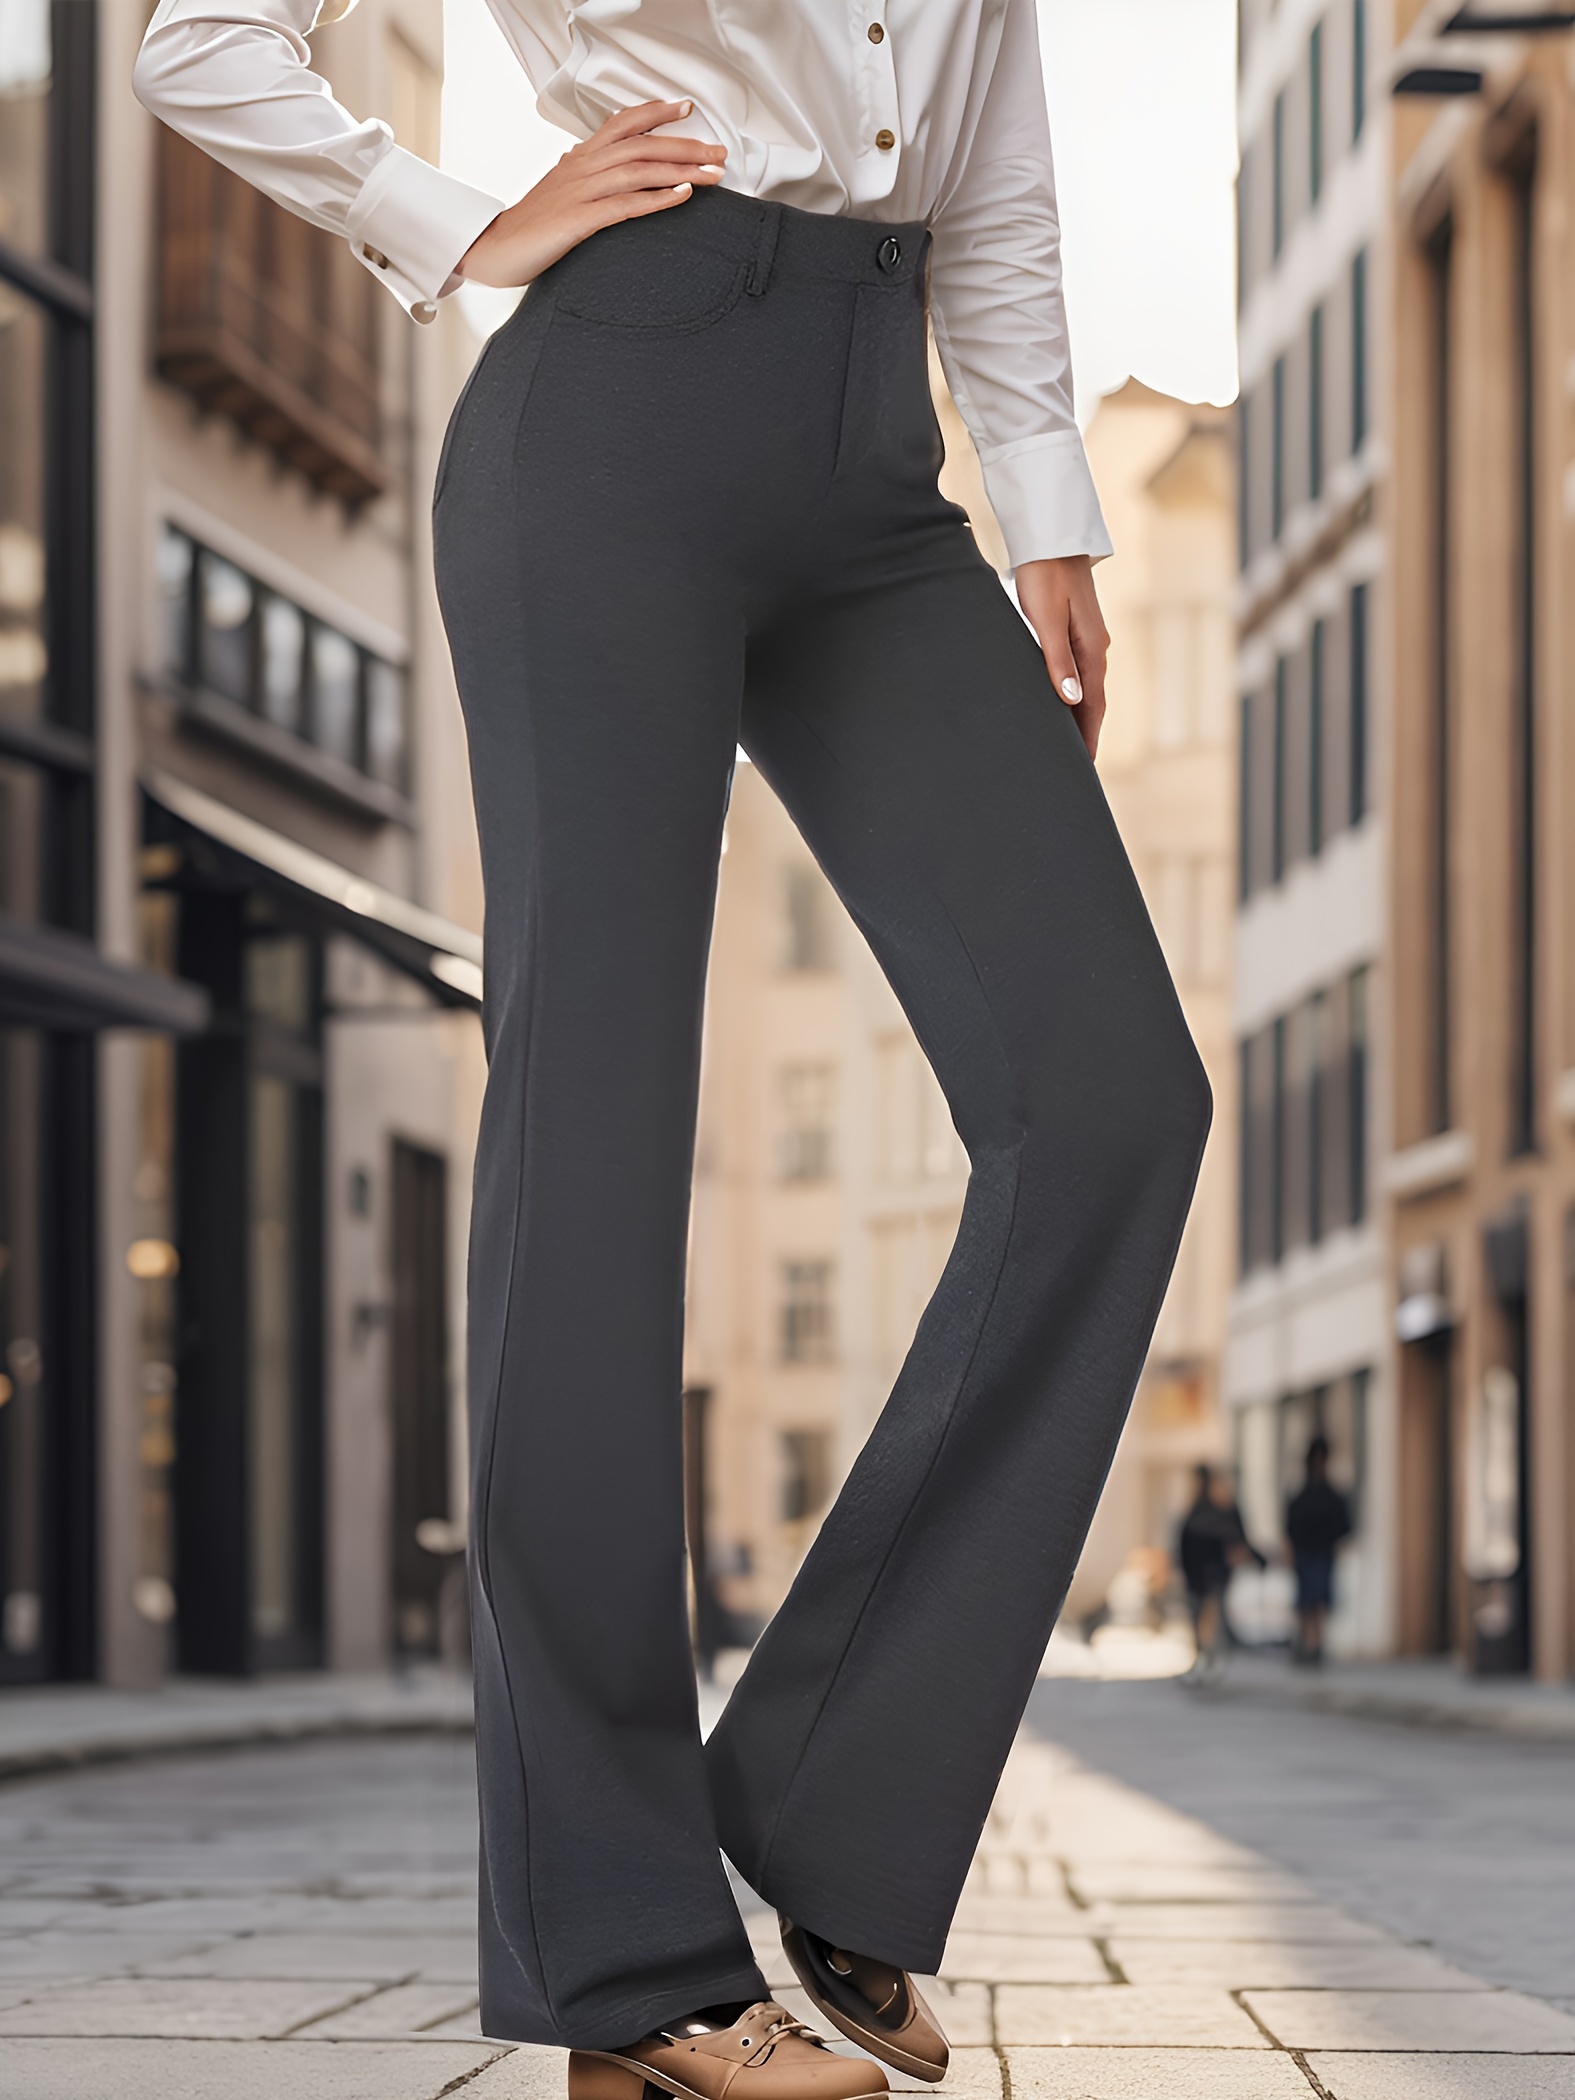 ShomPort Dress Pants for Women Business Casual Stretch Skinny Work Pants  Slim Pencil Pants with Pockets